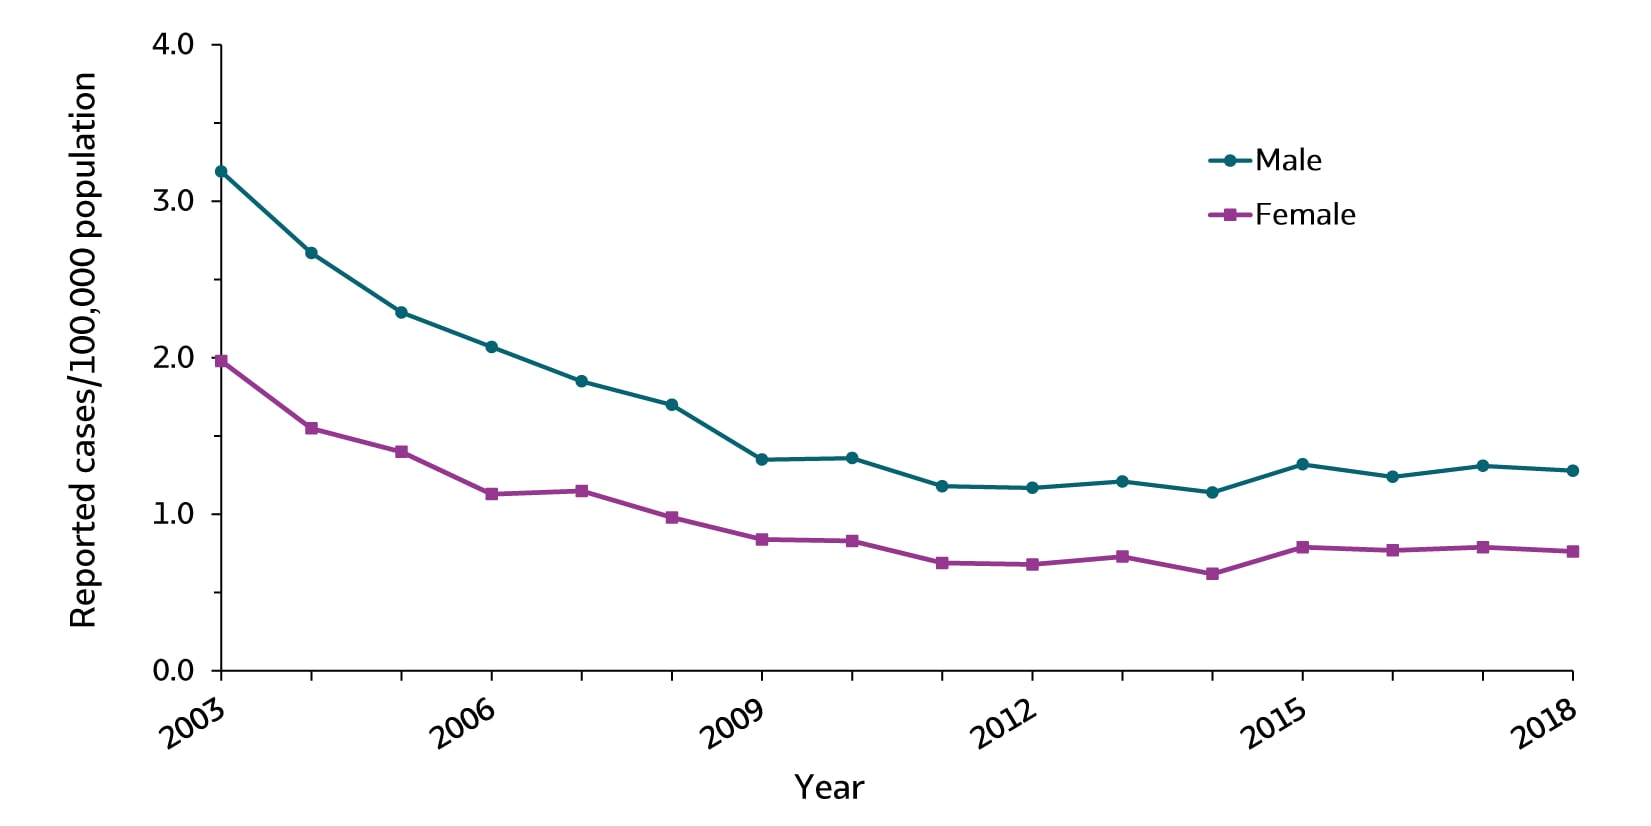 Figure 2.5. This line graph shows trends in rates of acute hepatitis B for males and females 2003 through 2018. Rates of acute hepatitis B declined for males and females from 2003 through 2009 and remained stable from 2009 through 2018. Rates for males were higher than rates for females for all years.